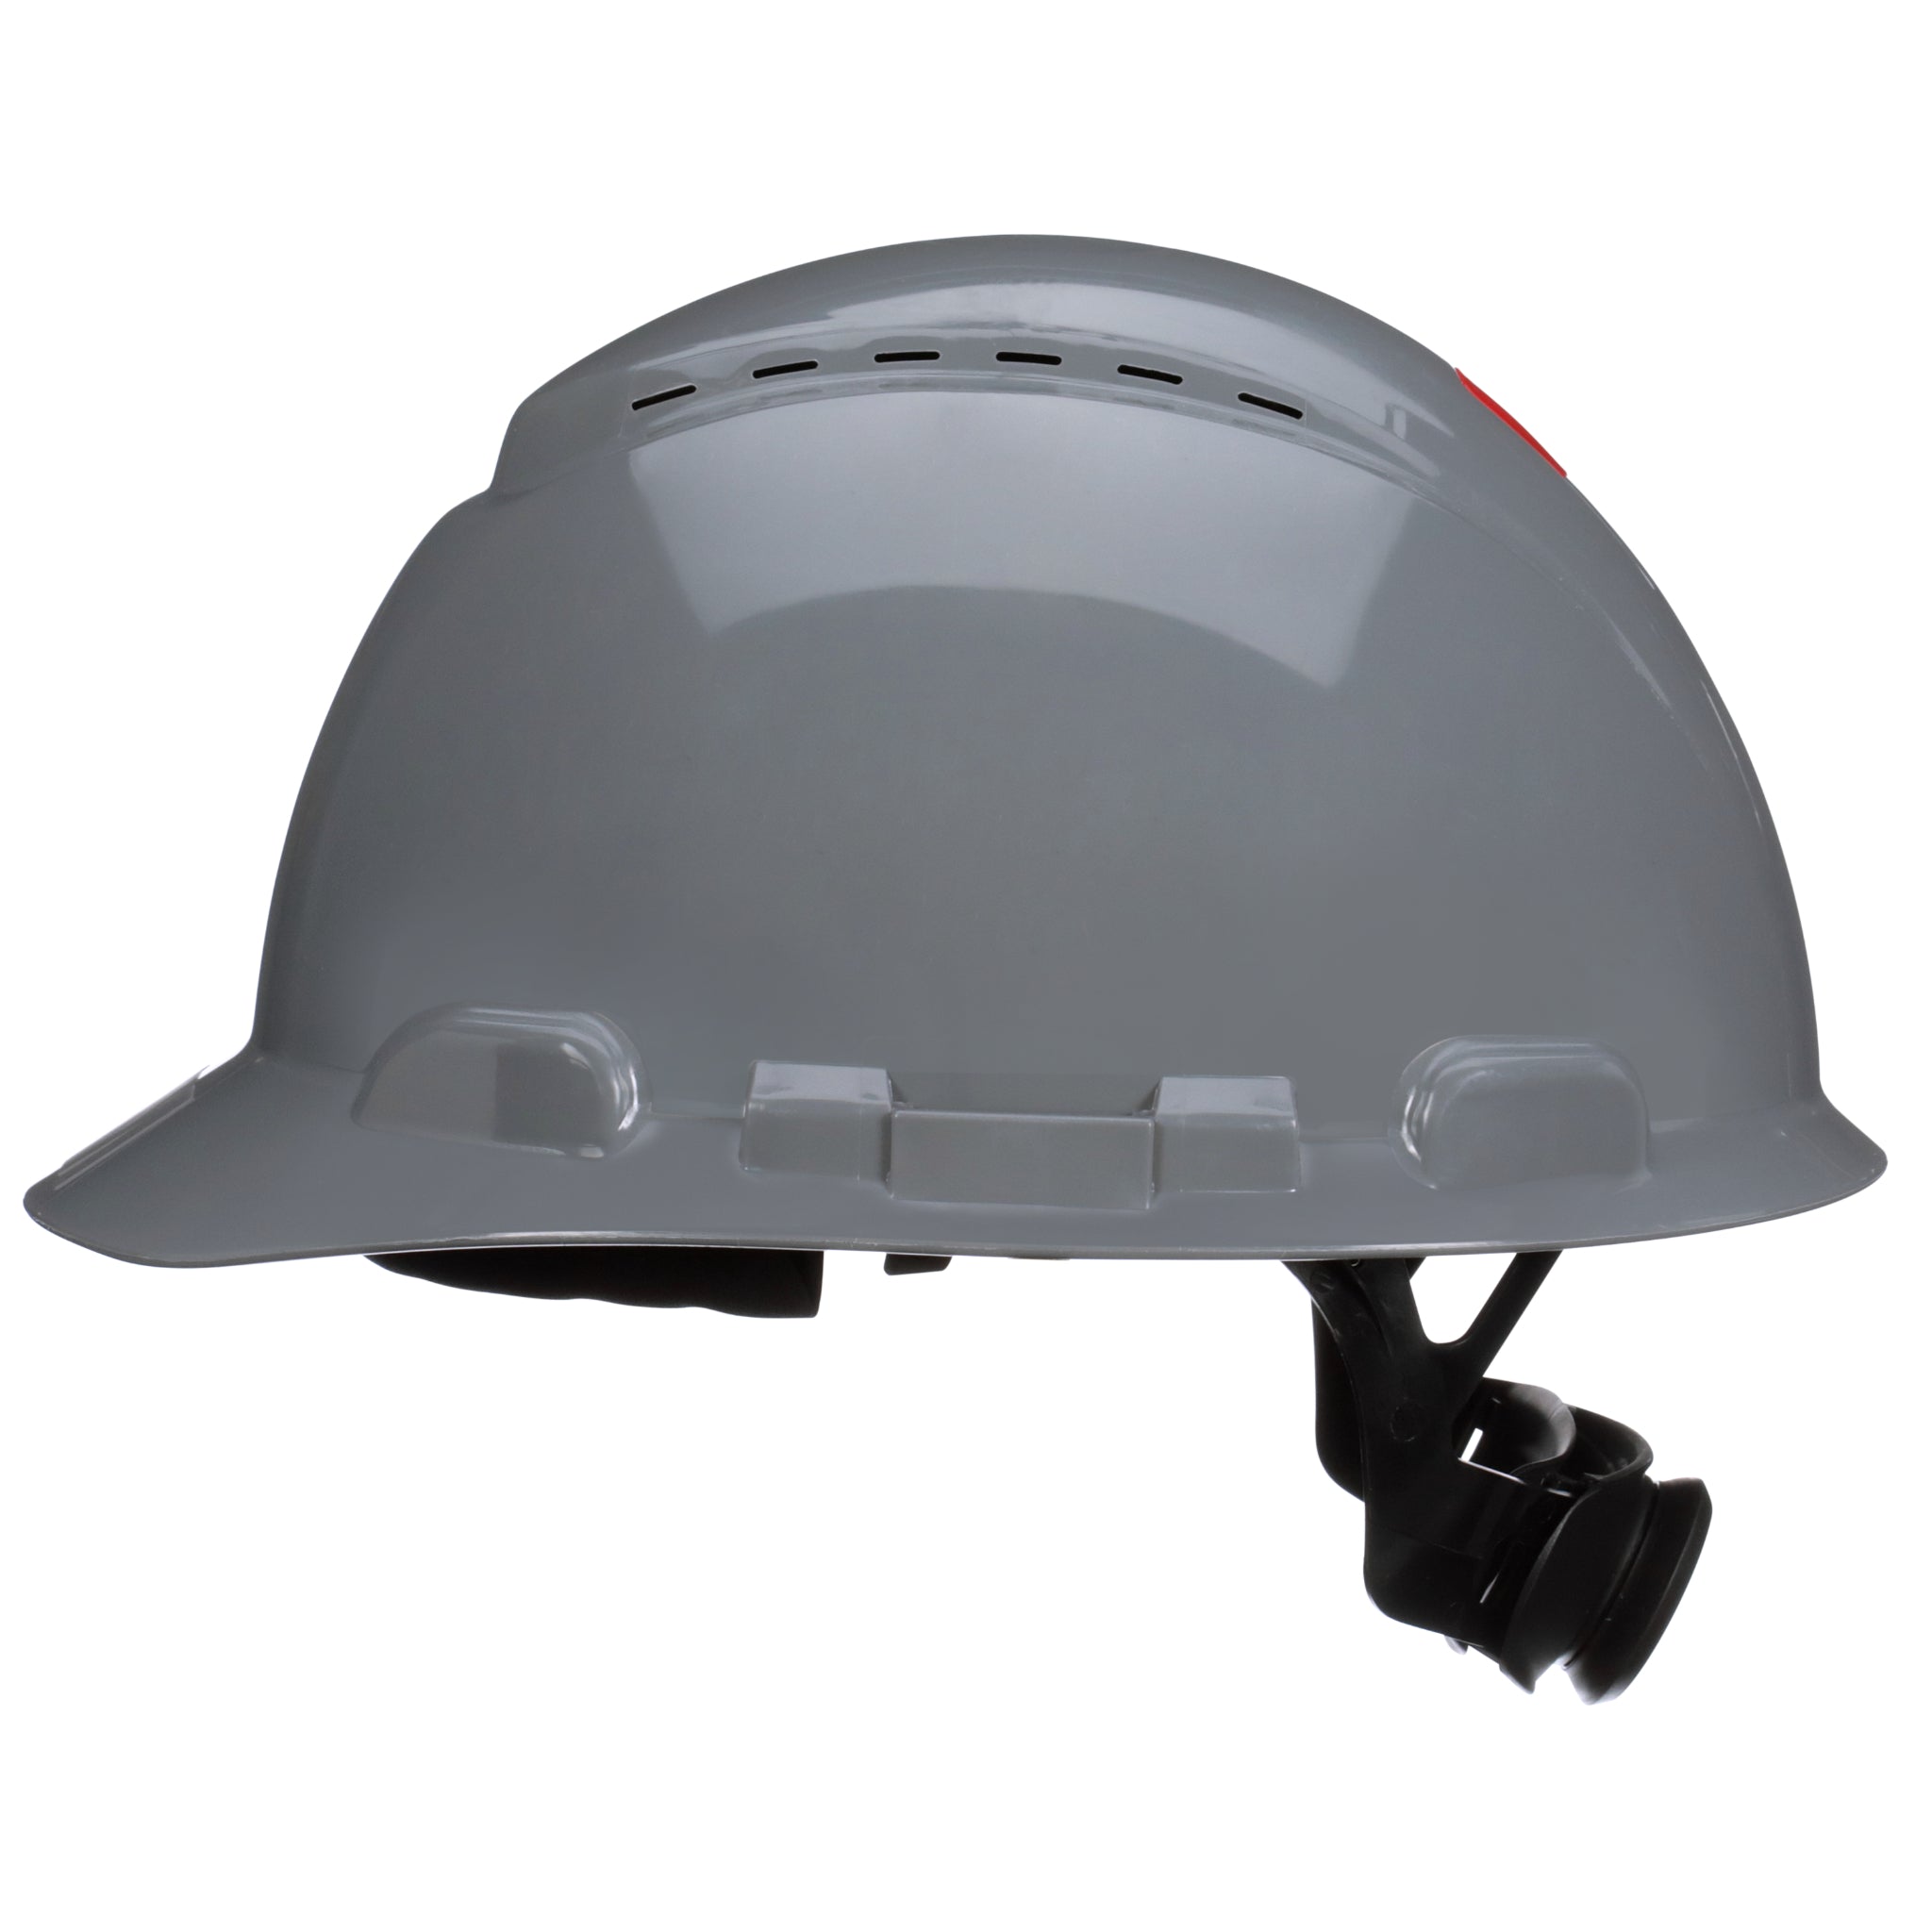 3M SecureFit Hard Hat H-708SFV-UV, Grey, Vented, 4-Point Pressure Diffusion Ratchet Suspension, with UVicator, 20 ea/Case